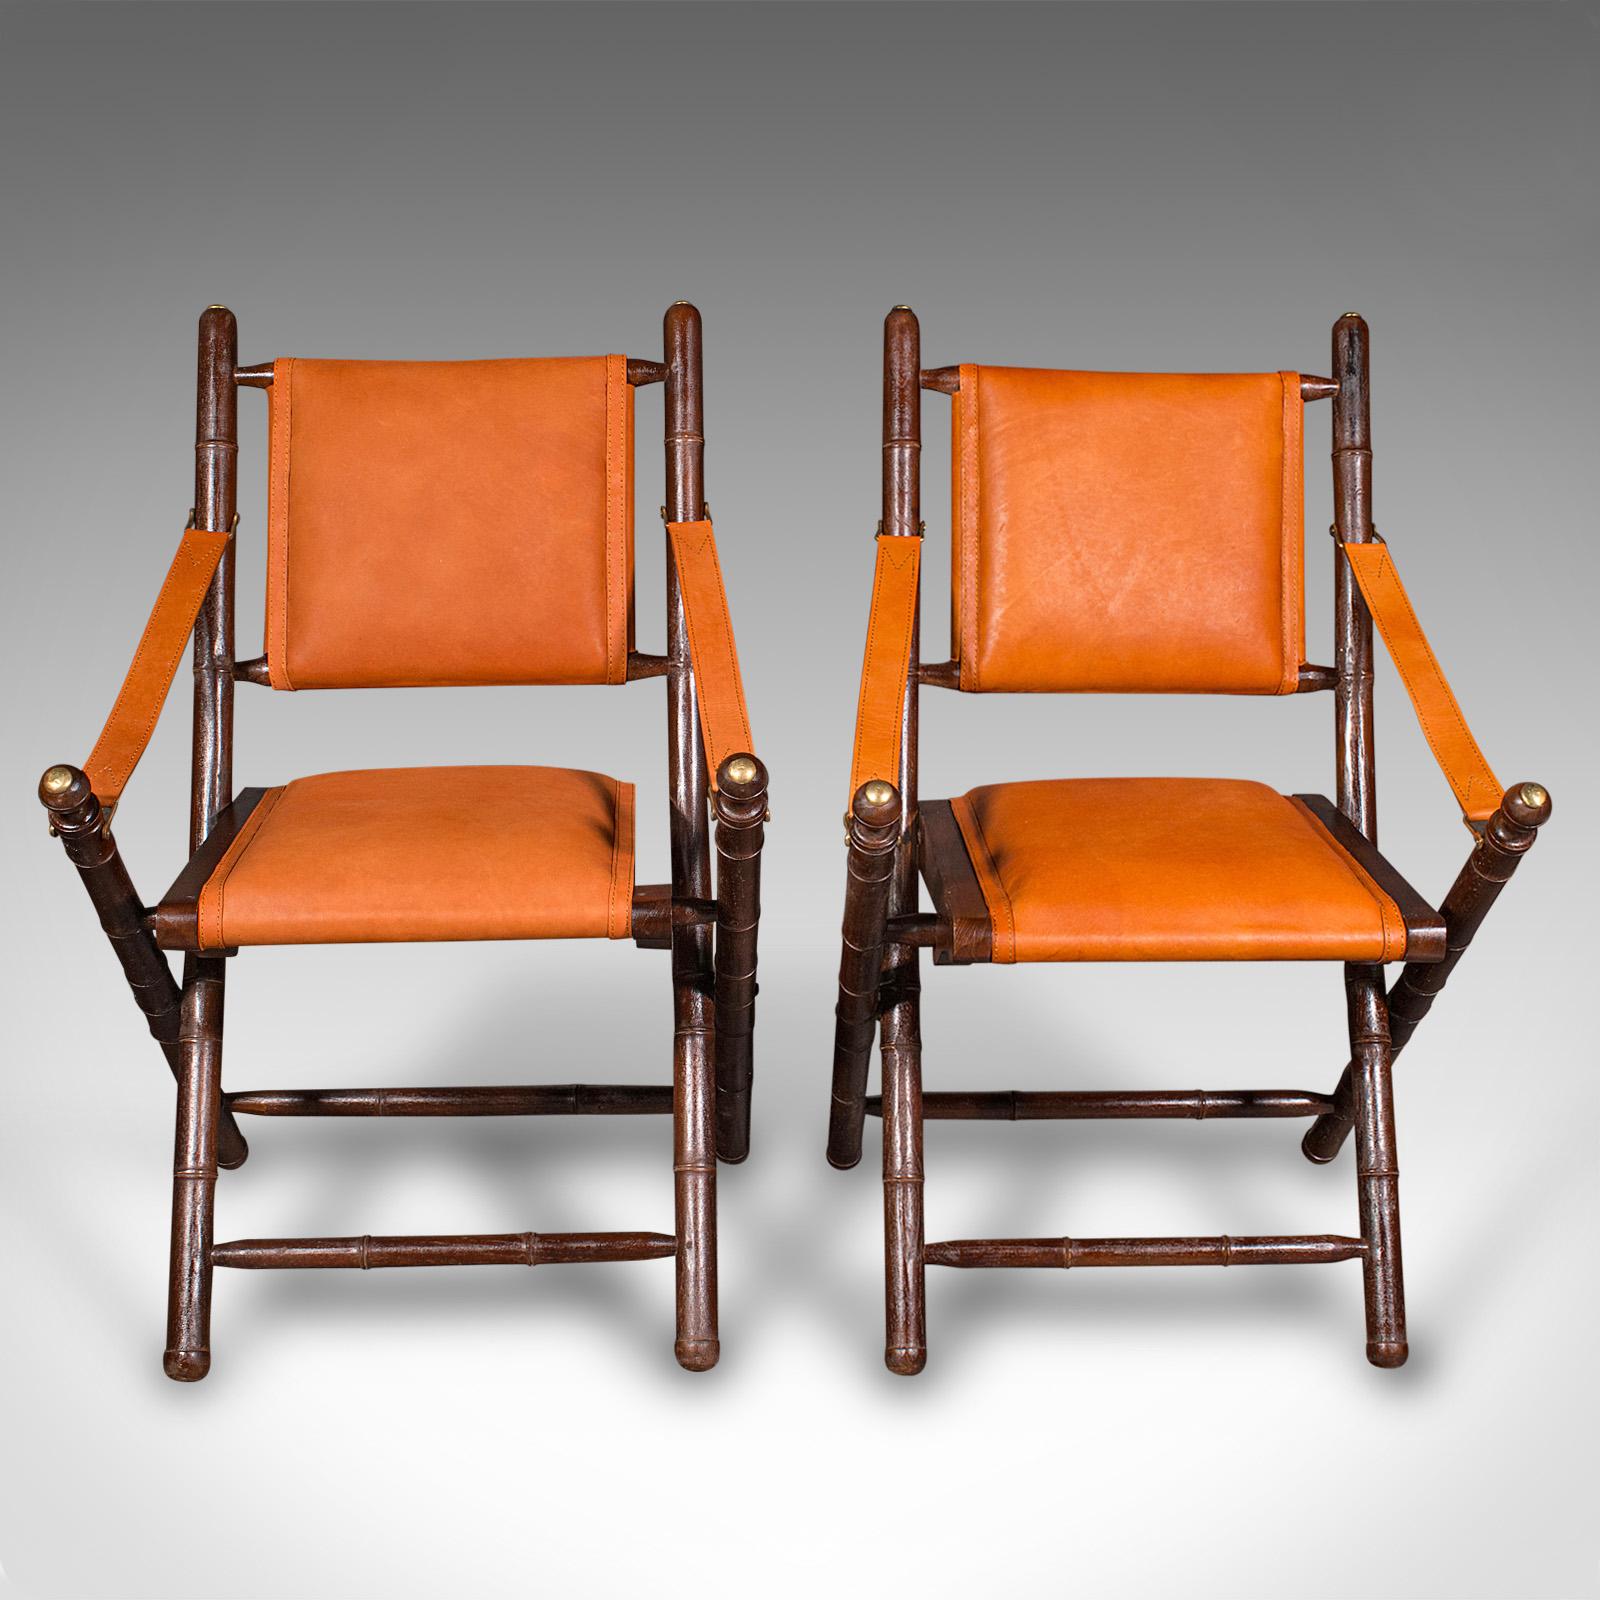 This is a pair of contemporary orangery chairs. An English, colonial style faux bamboo and leather folding veranda or patio seat.

Vibrant and well appointed outdoor or occasional chairs
Presented in very good order throughout
Crafted pine in the